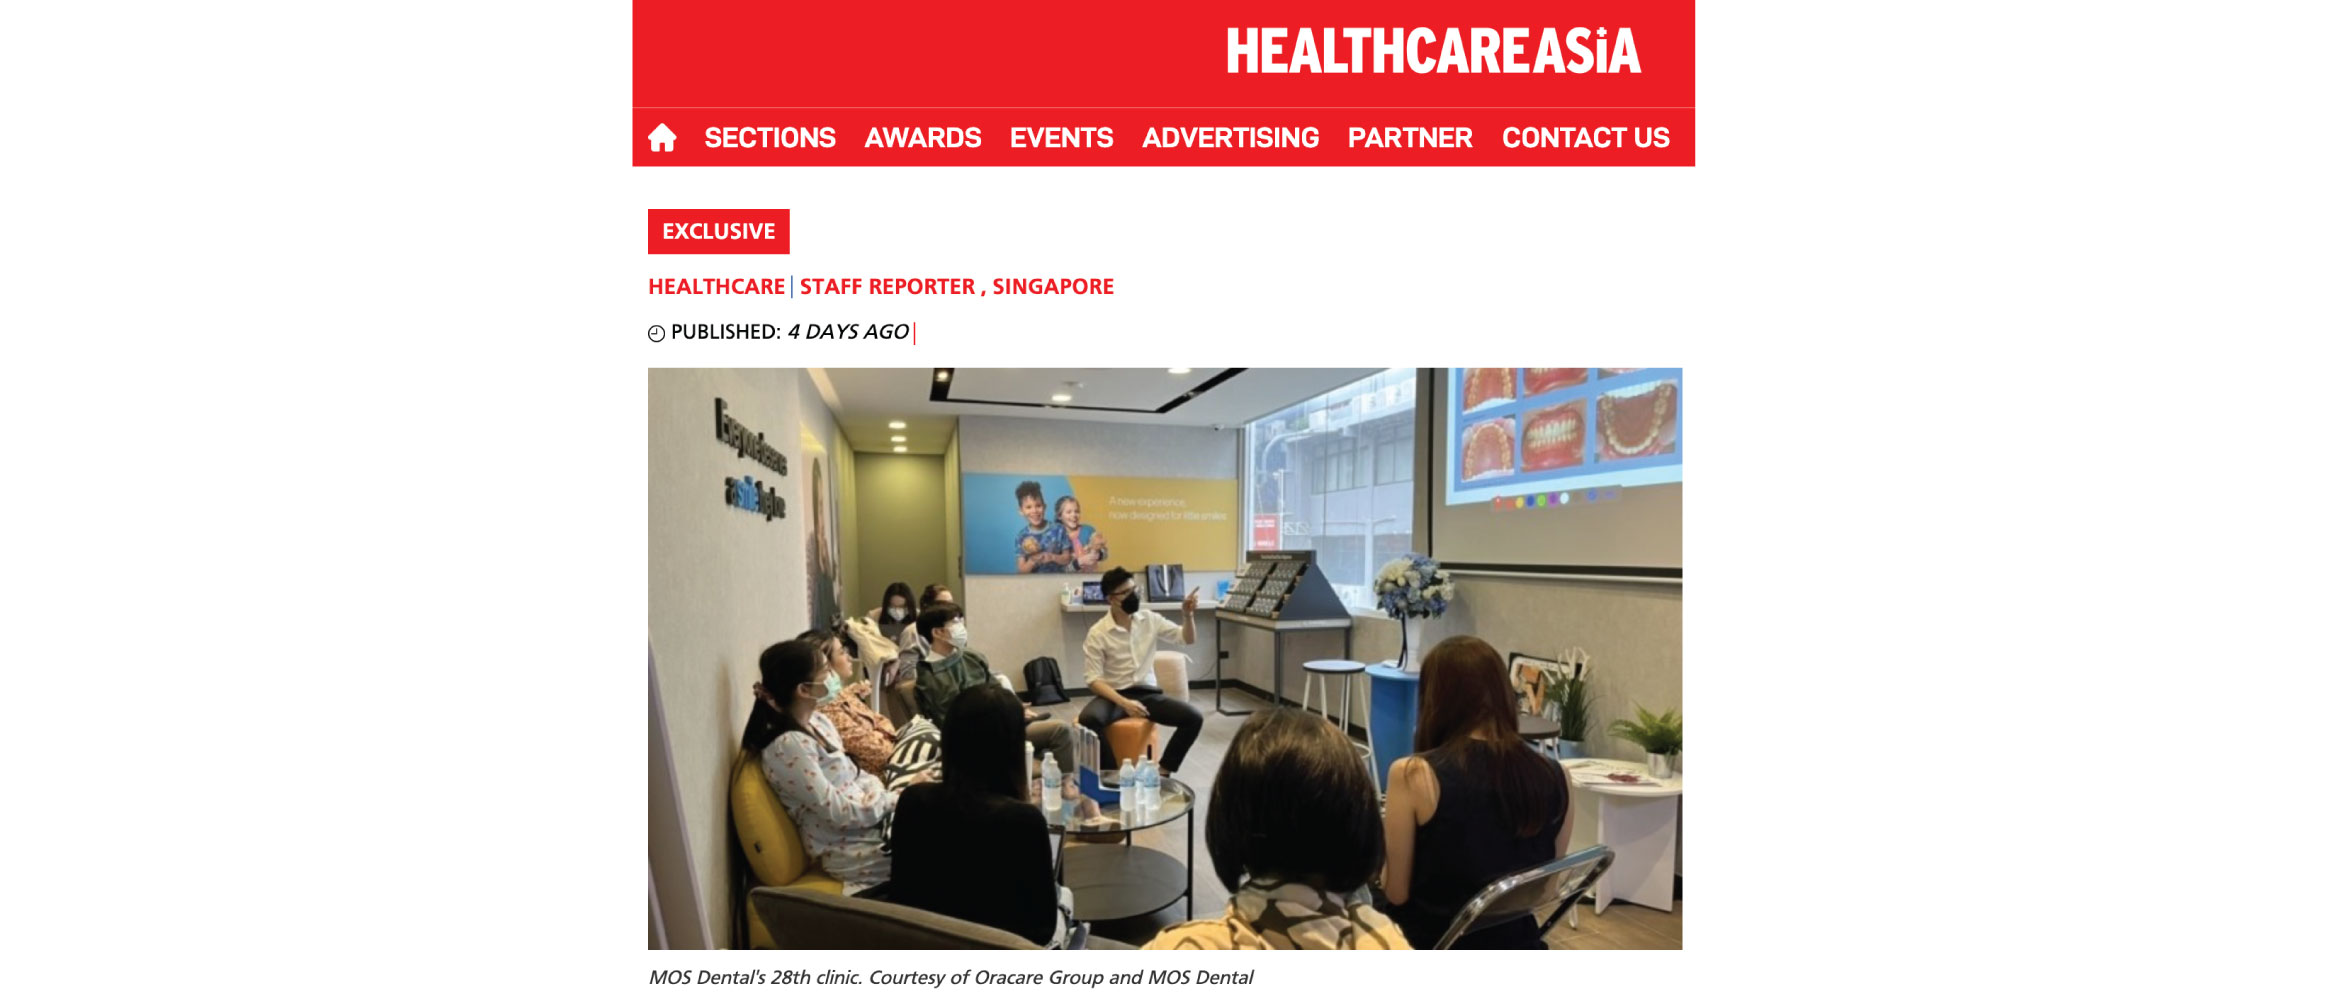 Oracare Group’s strategy doubled the profit of a family-run dental clinic